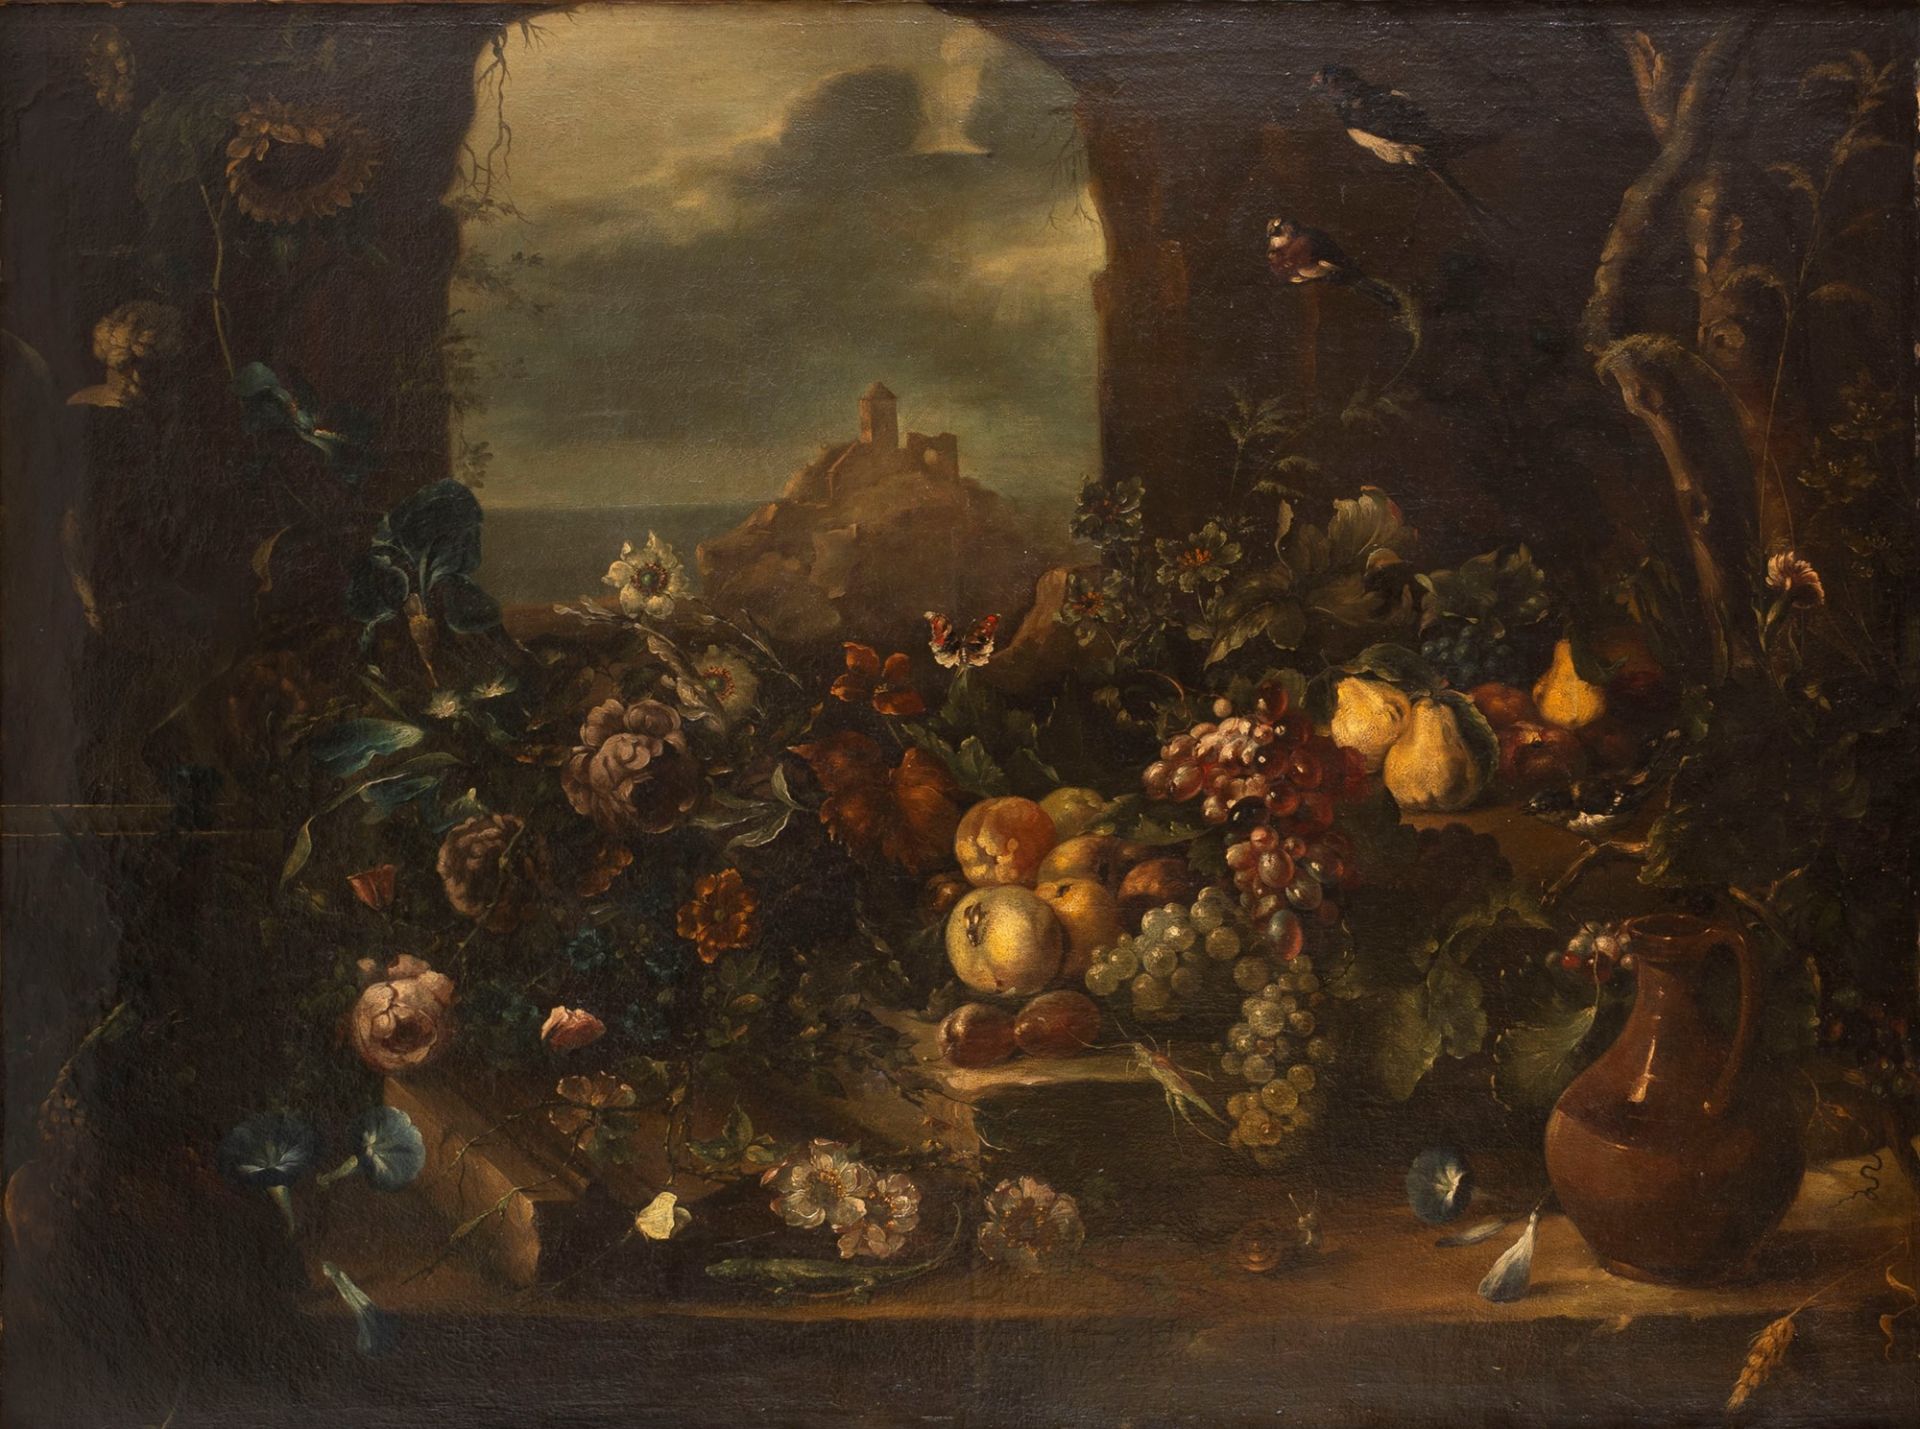 Flemish School, XVII century - Triumph of flowers and fruit with a garden in the distance